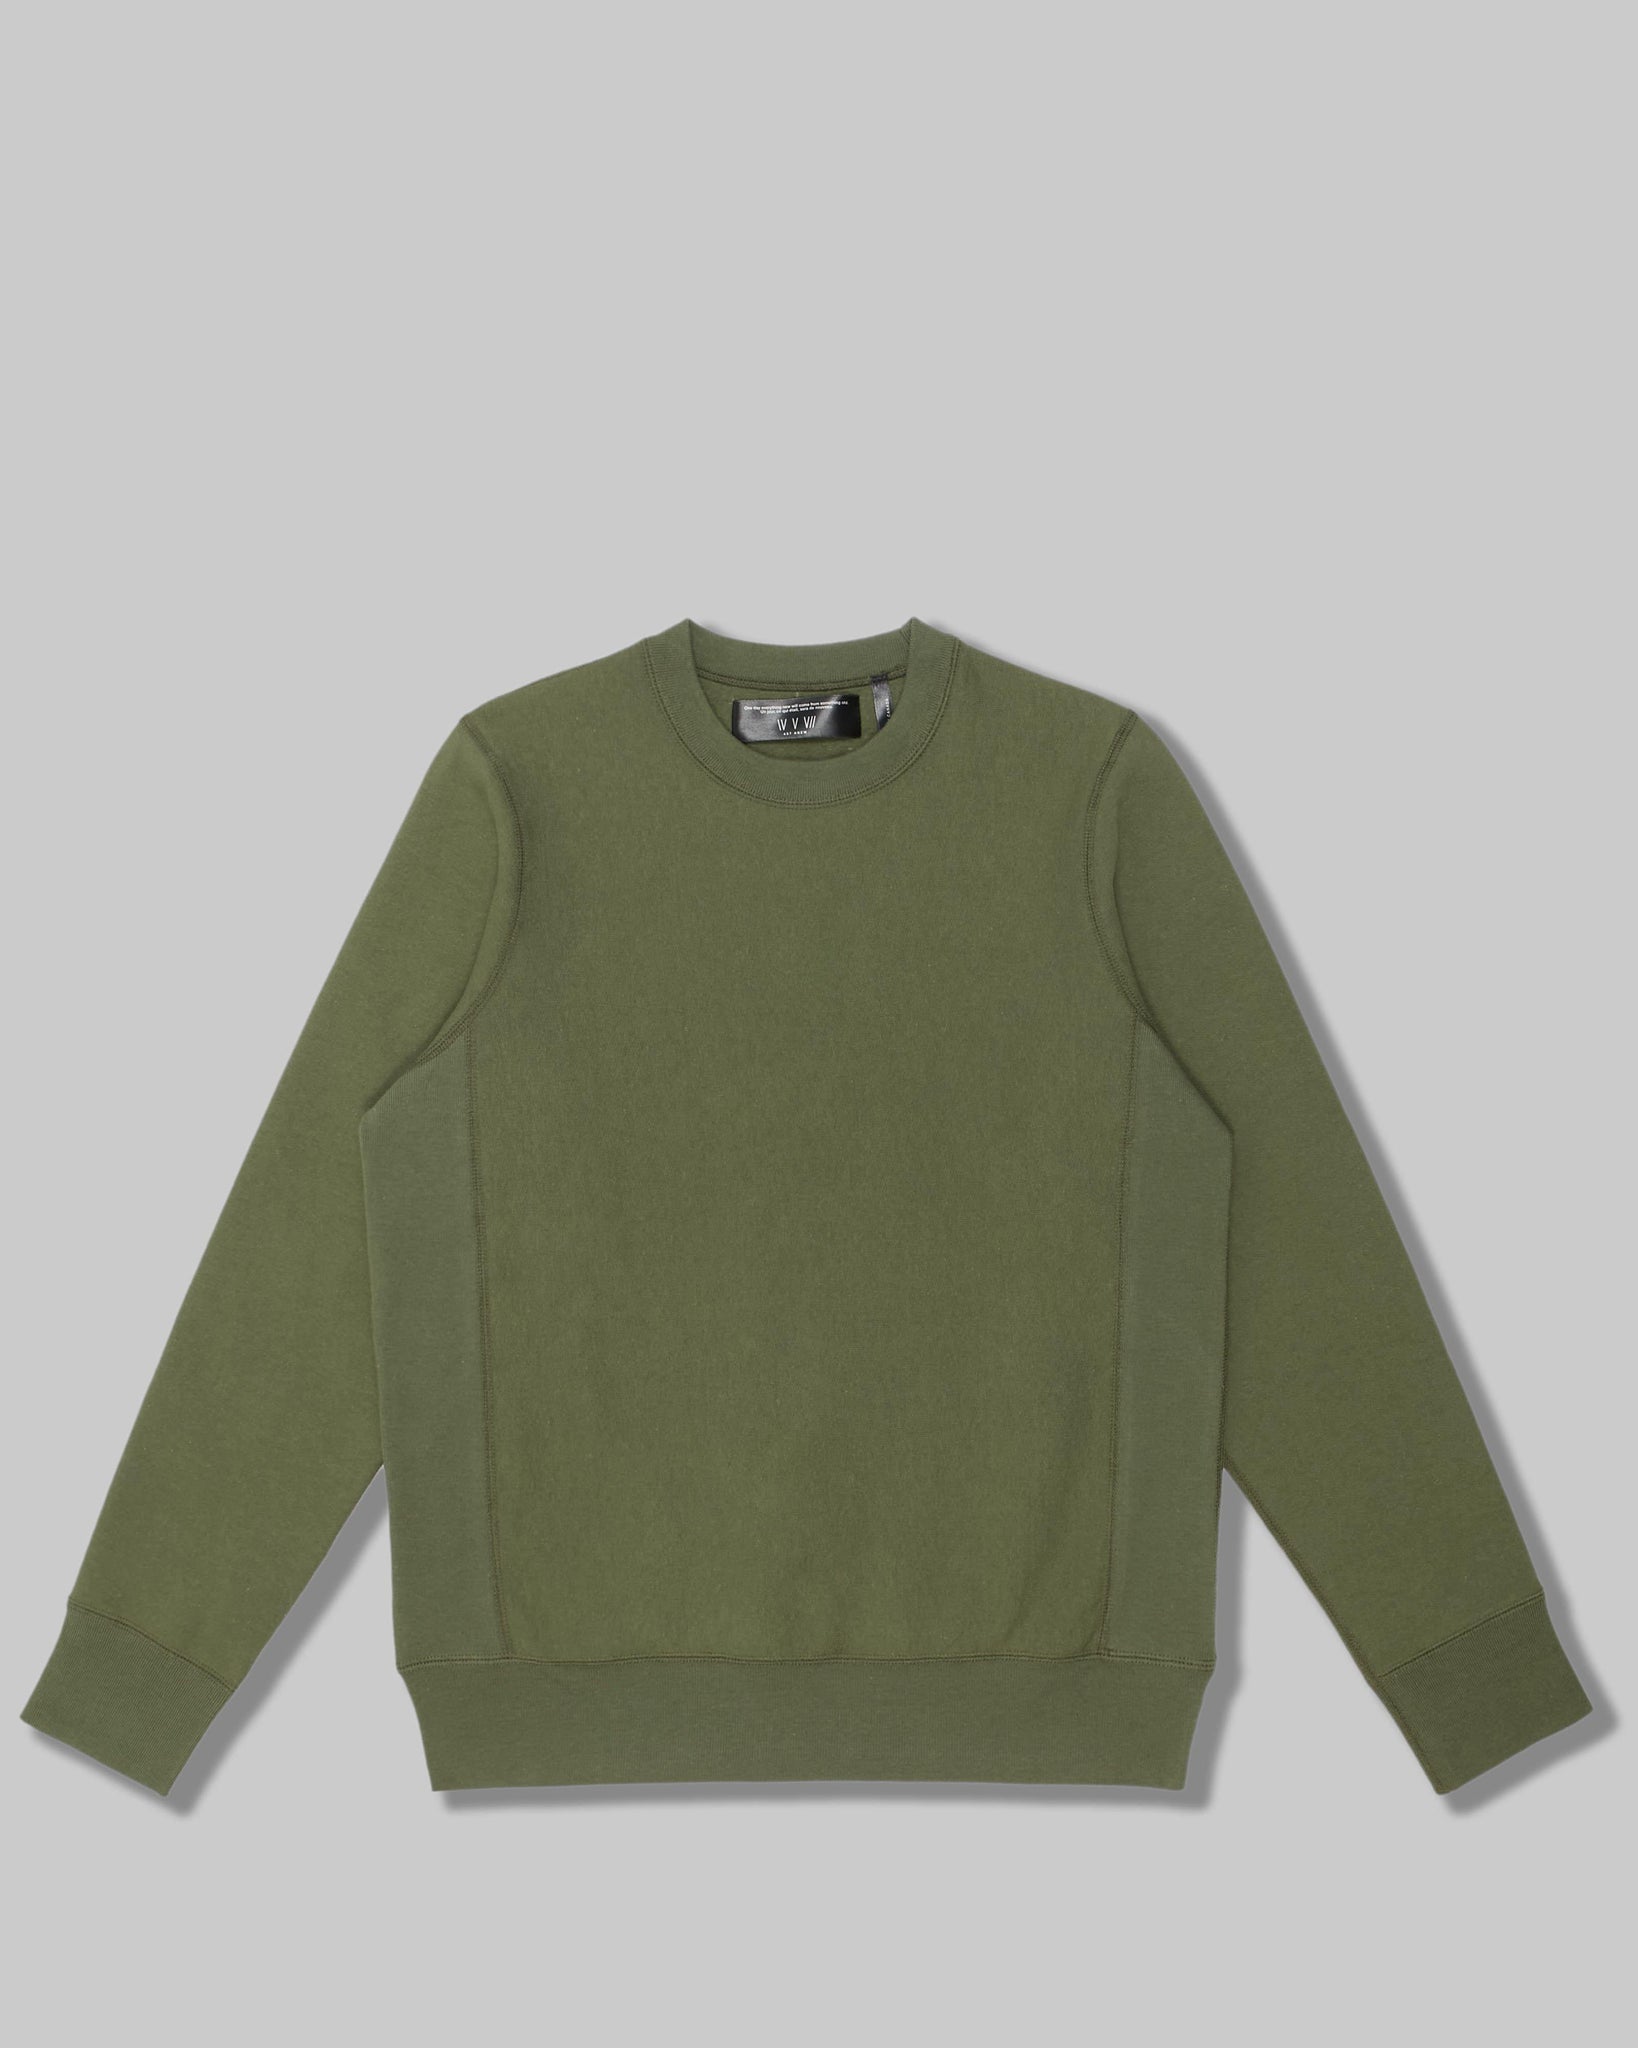 Crewneck in Heavyweight American Cotton - 457 ANEW | Atelier IV V VII Inc.